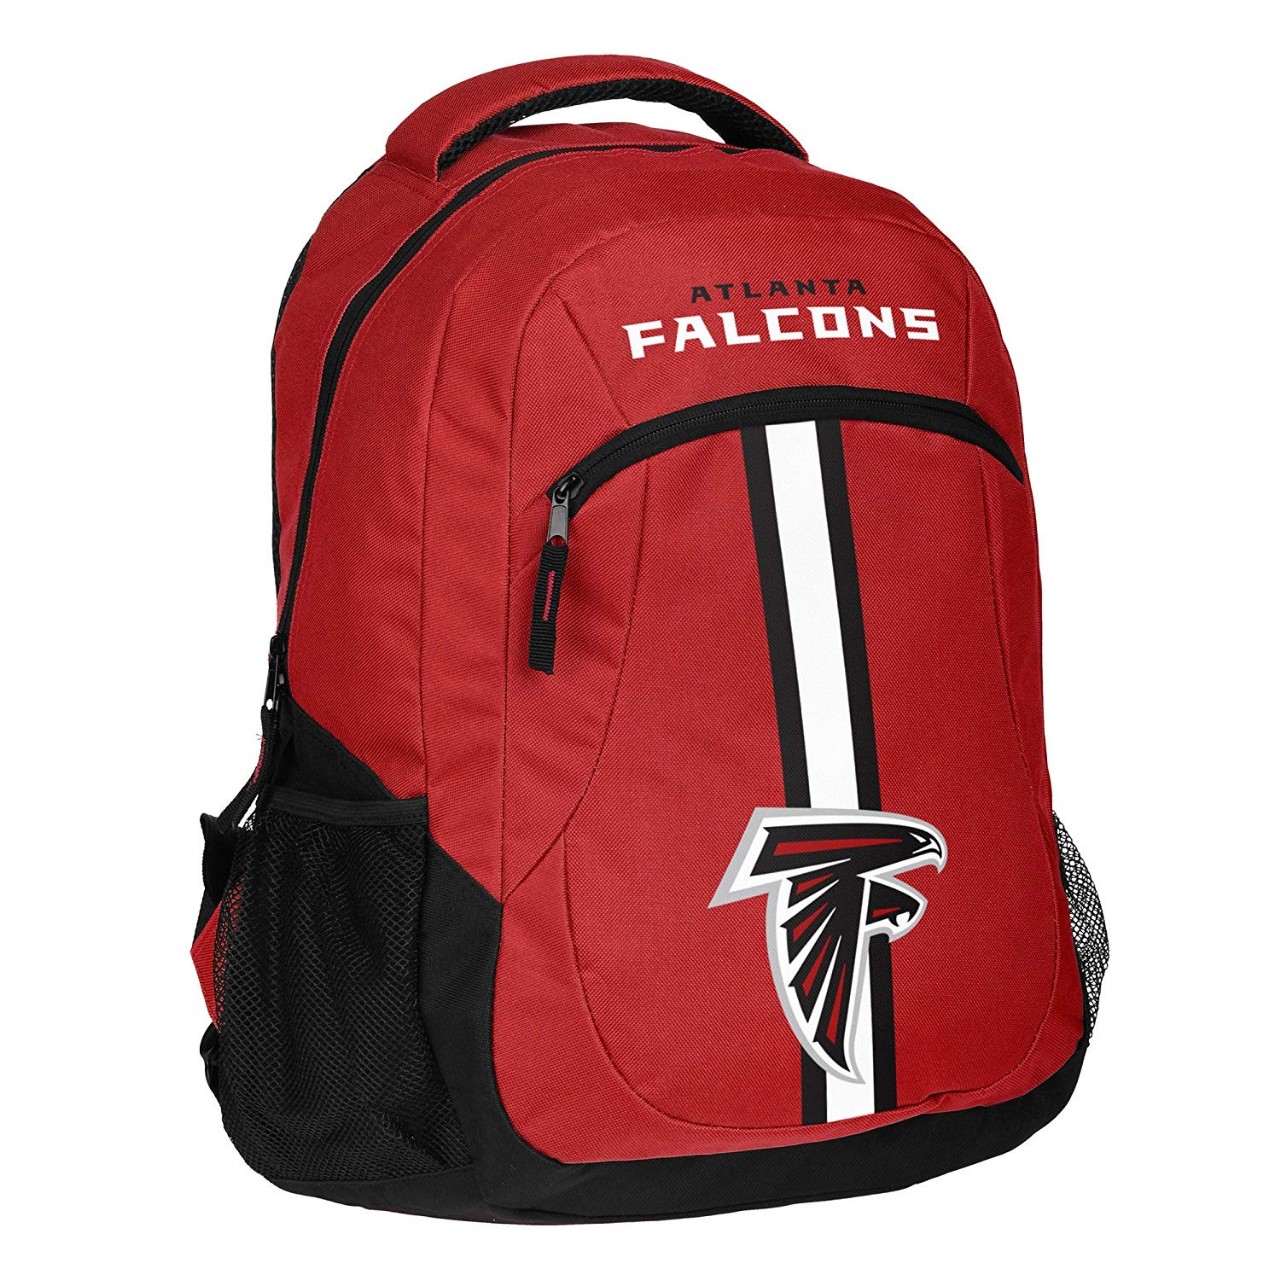 NFL Atlanta Falcons Dual Side Backpack with Laptop Compartment, Action Stripe Logo Bag, Team Color